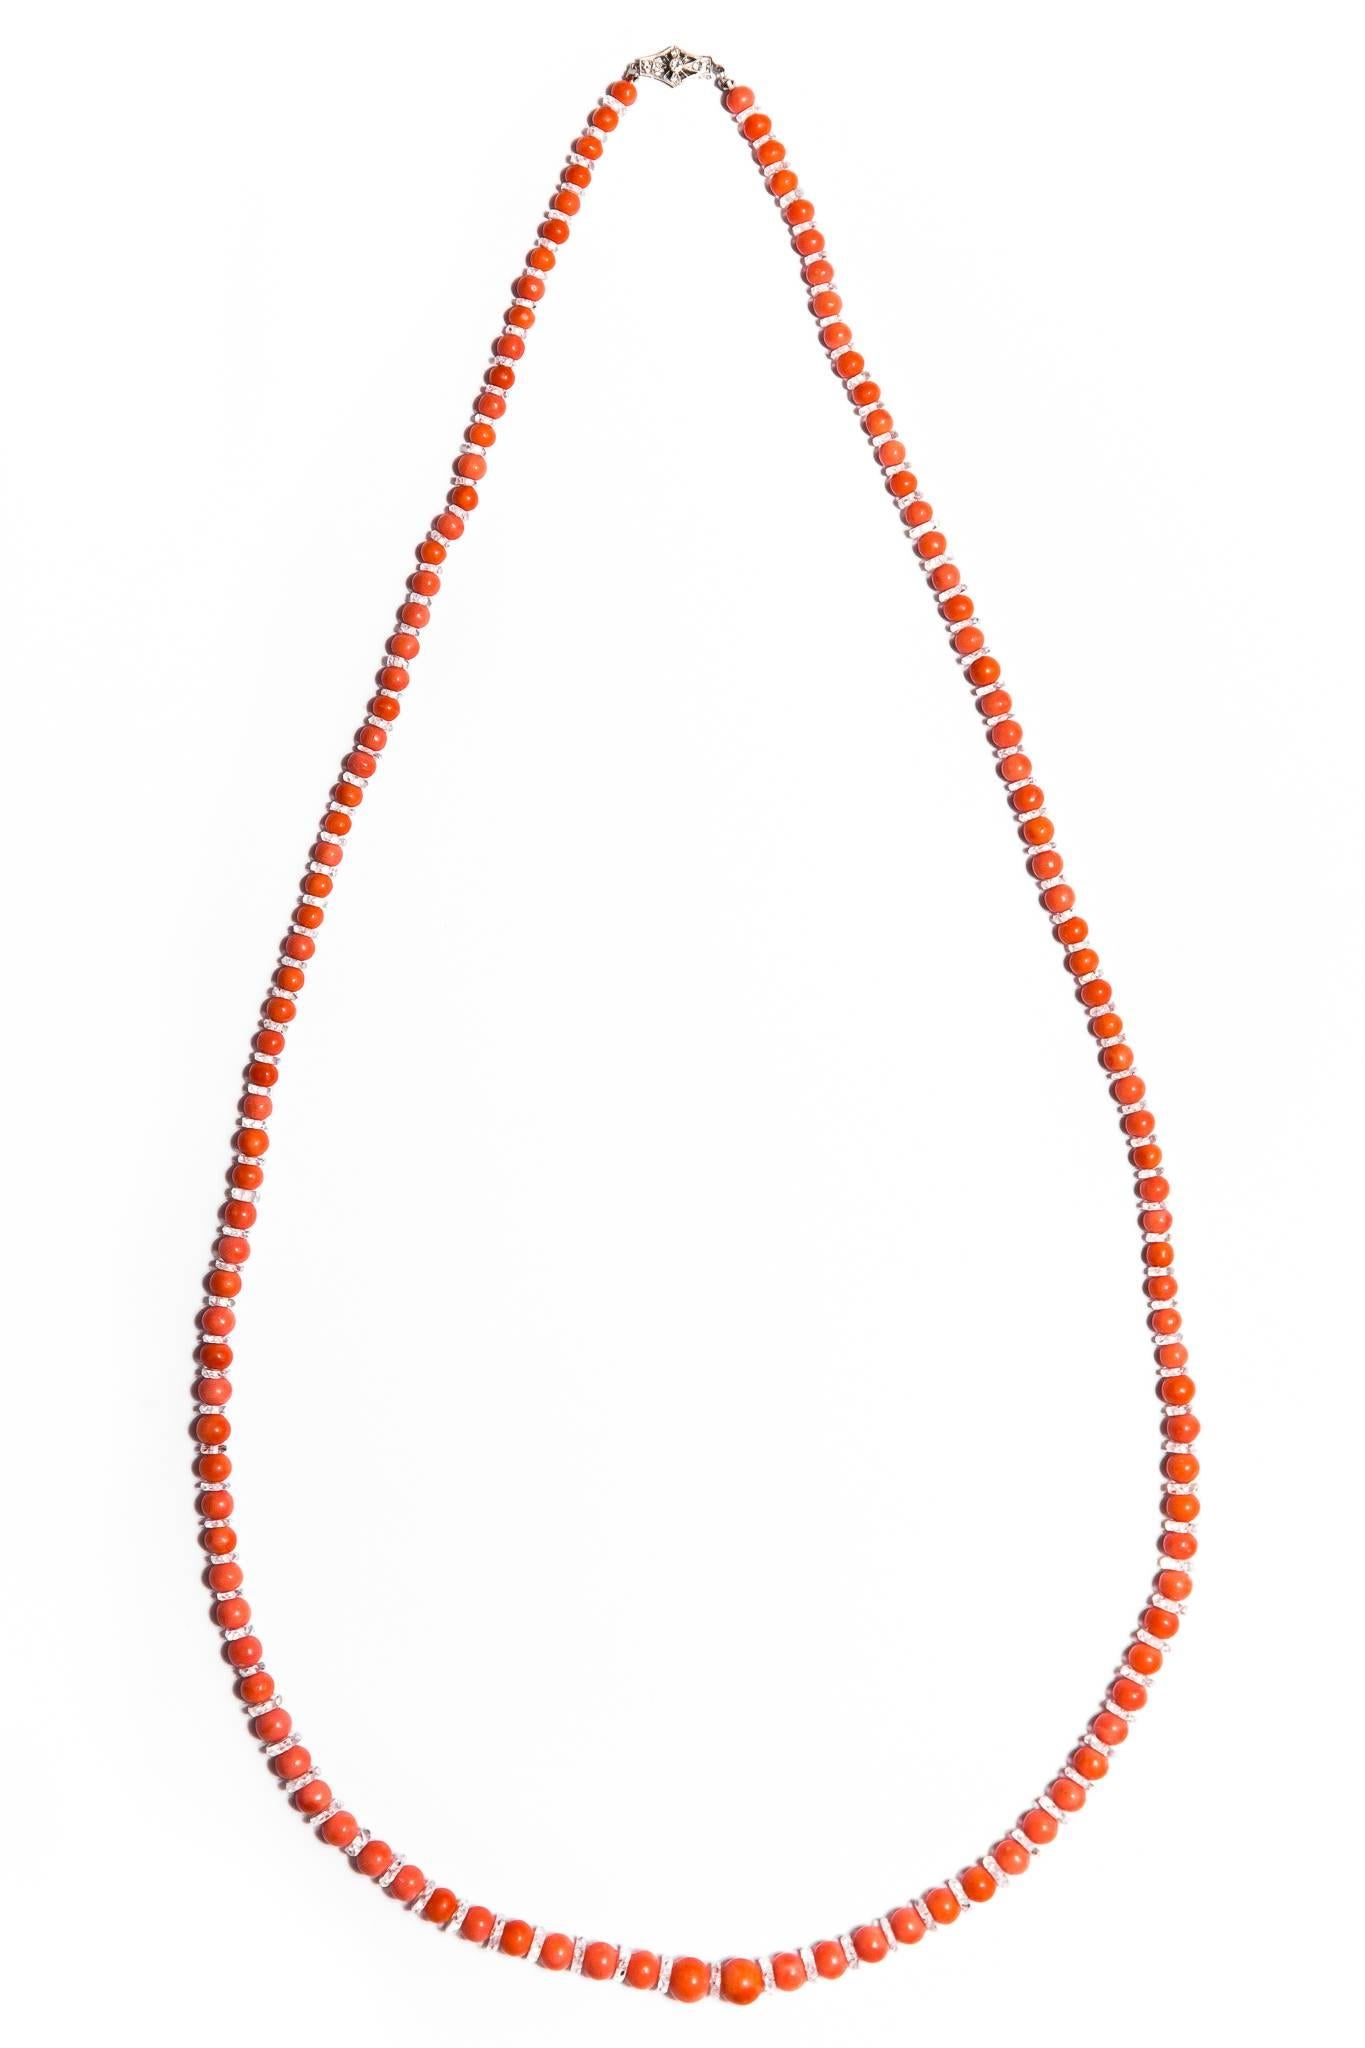 A beautiful art deco period natural coral and rock crystal opera length necklace with a platinum and diamond clasp. Featuring alternating round natural coral beads and faceted rock crystal disks, this necklace also boasts a platinum and diamond